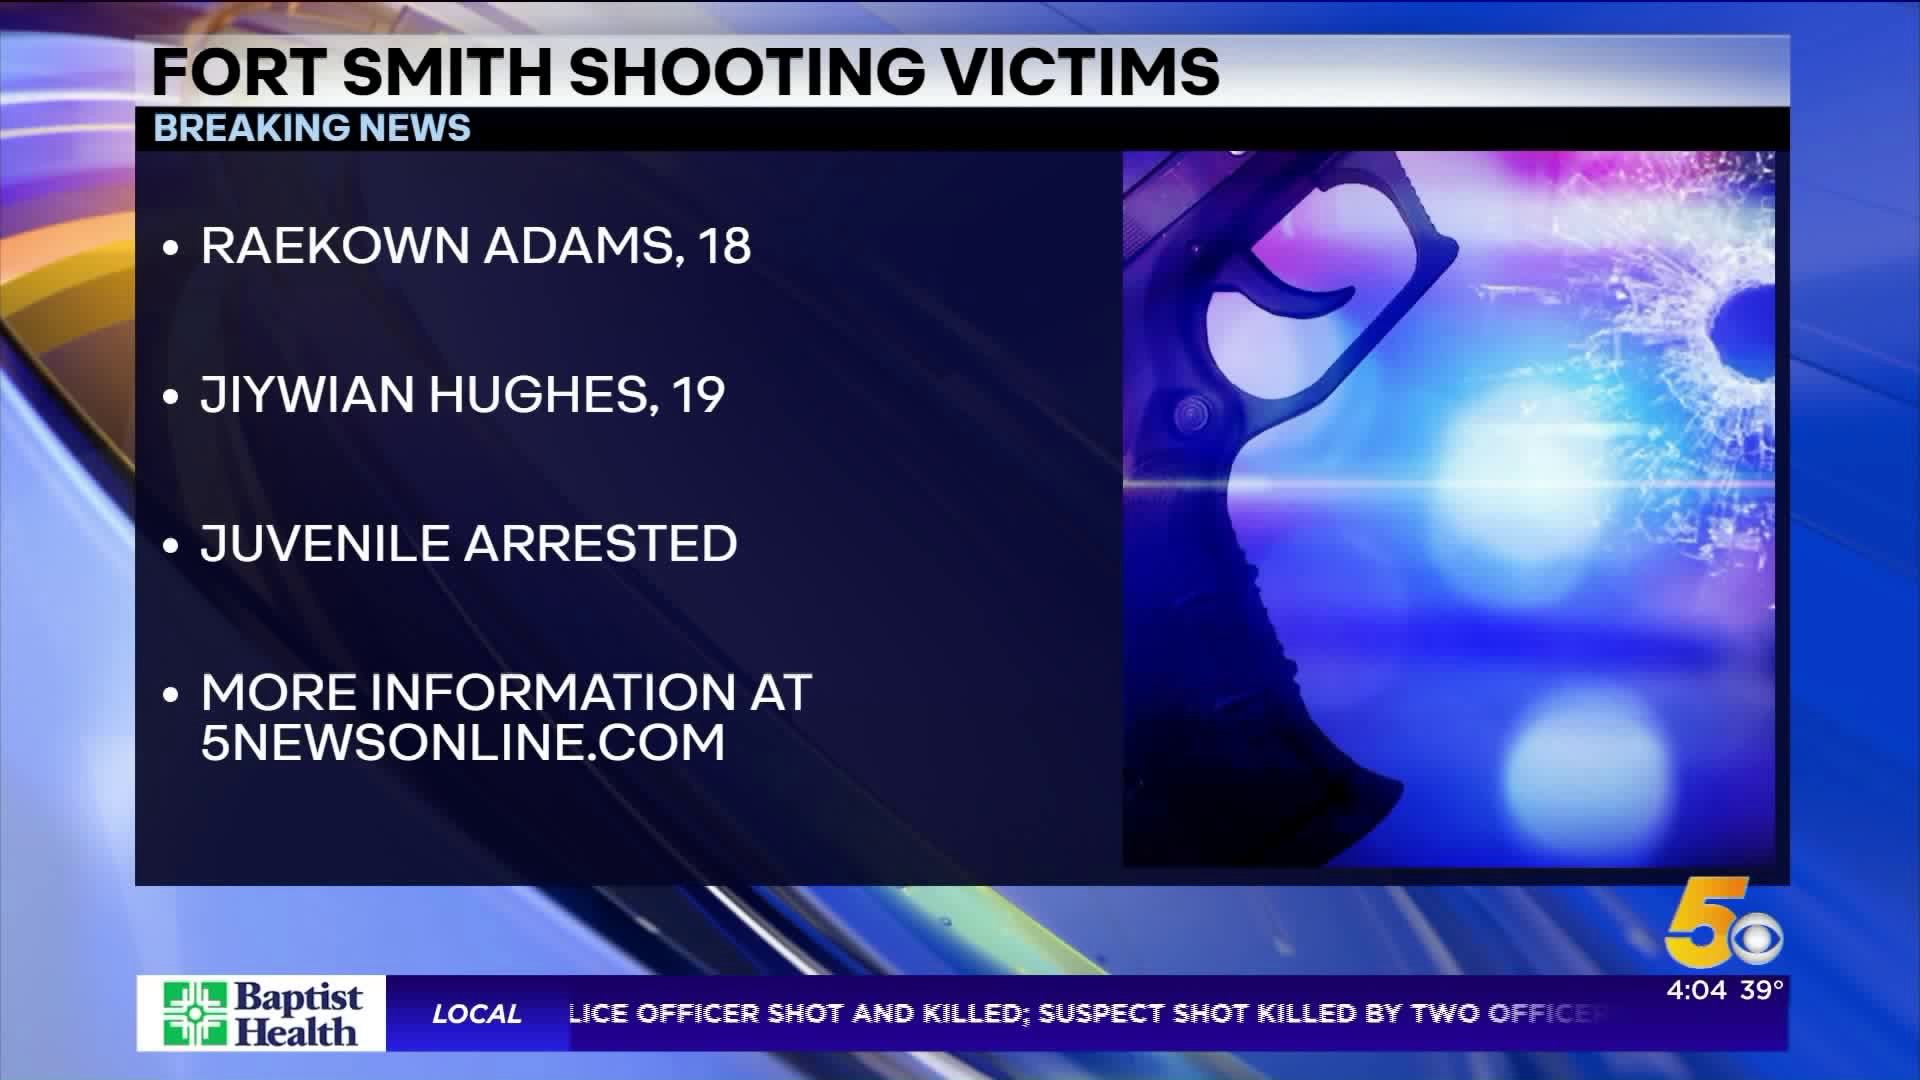 Fort Smith Police Arrest Young Drive-By Shooter, Victims Identified